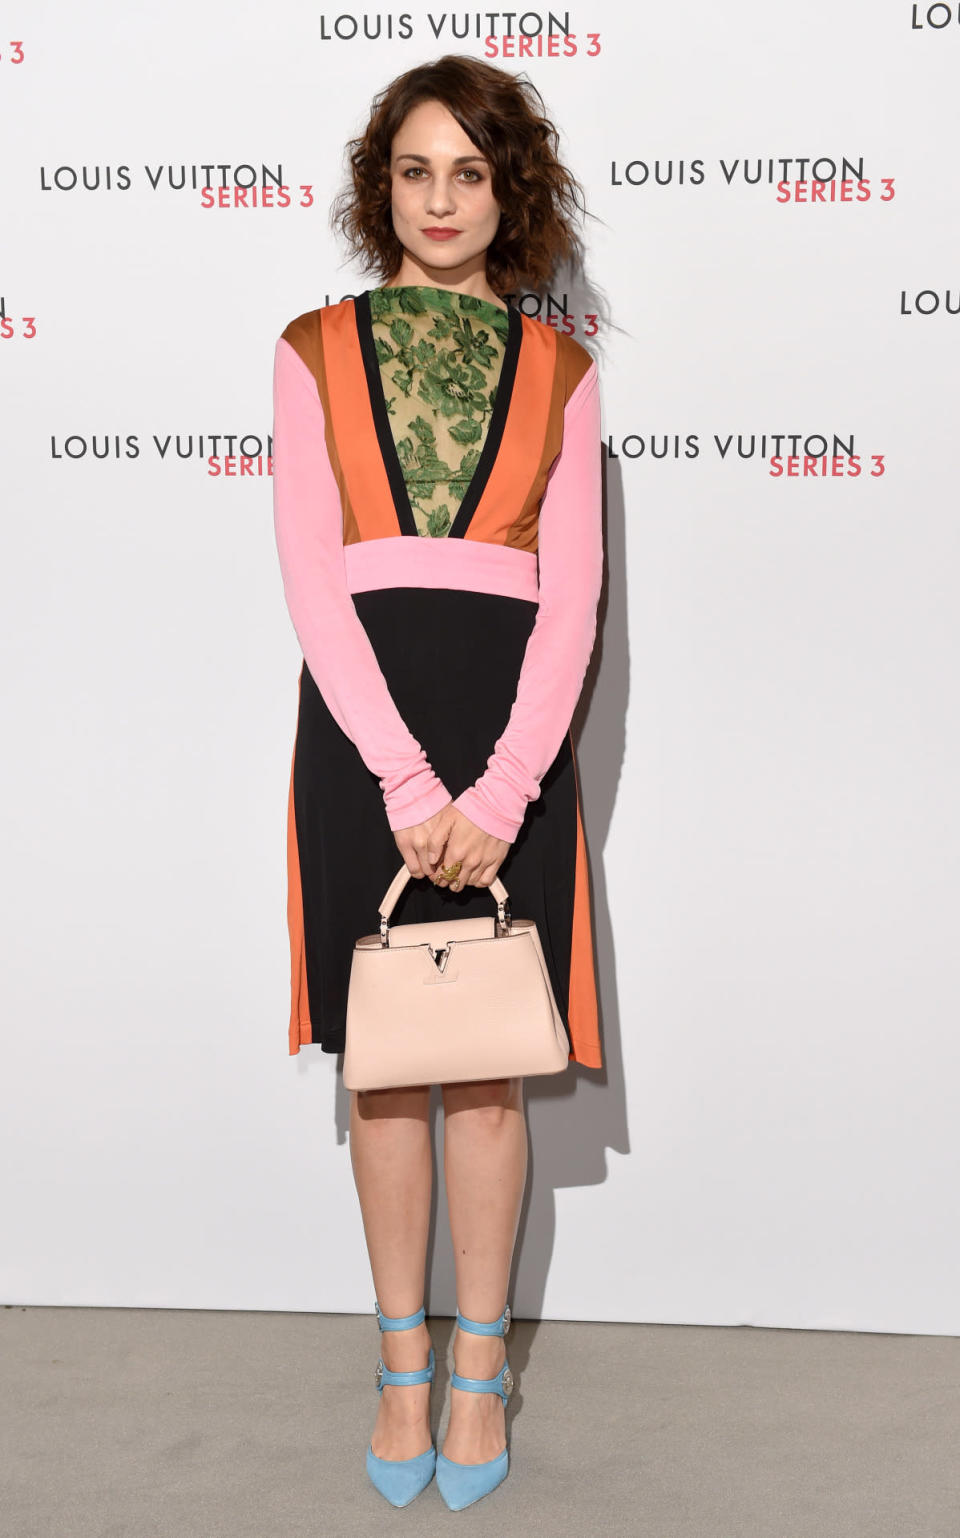 A bright Louis Vuitton number worn to the opening of the design houses’ Series 3 exhibition launch